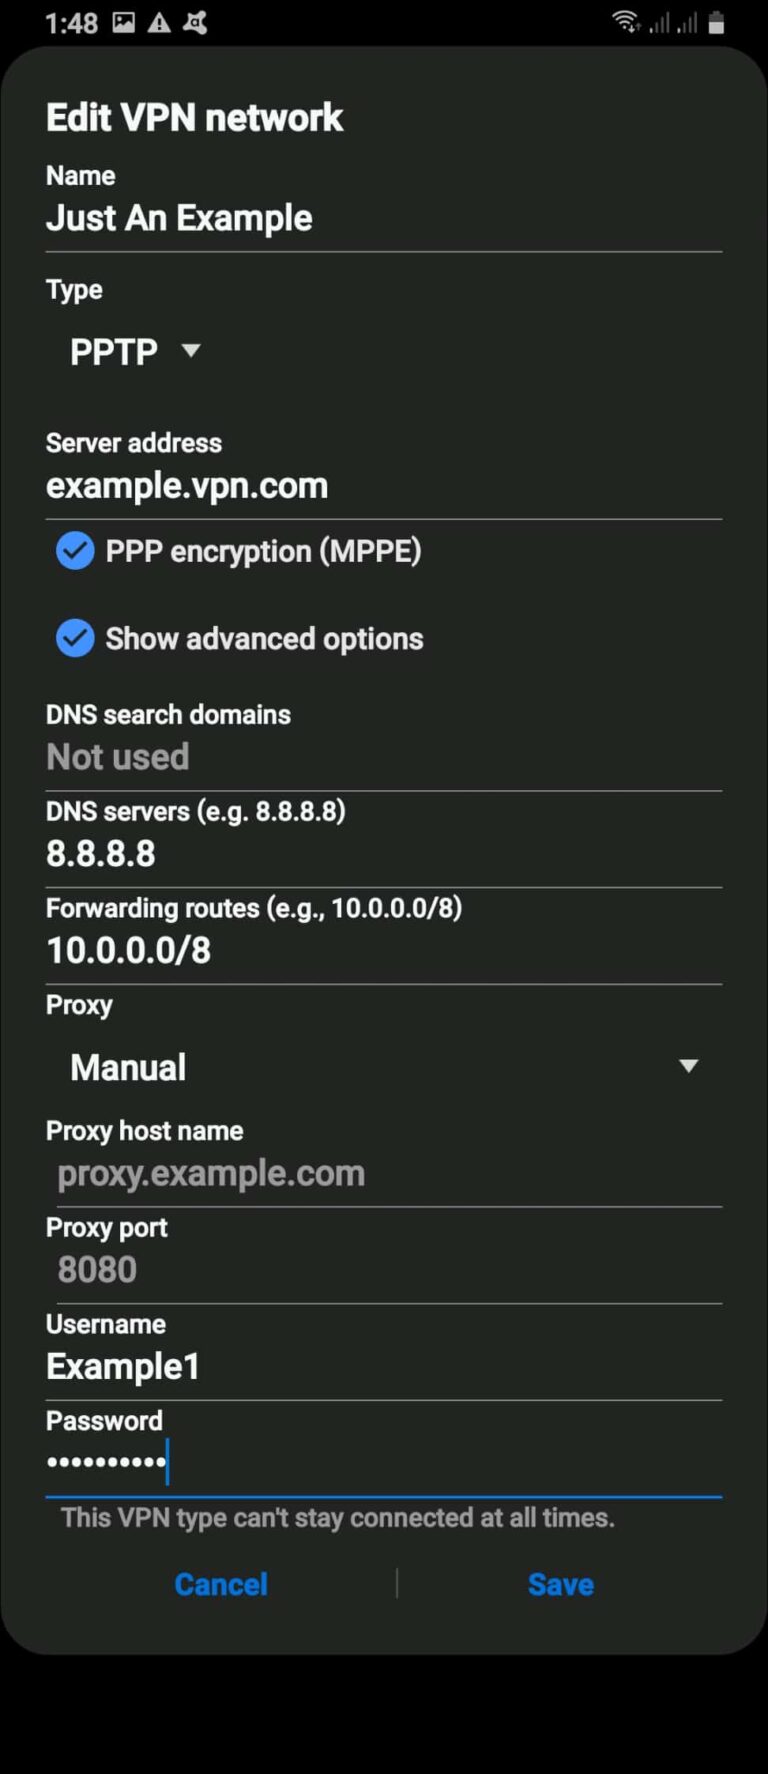 How can I use VPN on my phone for free?